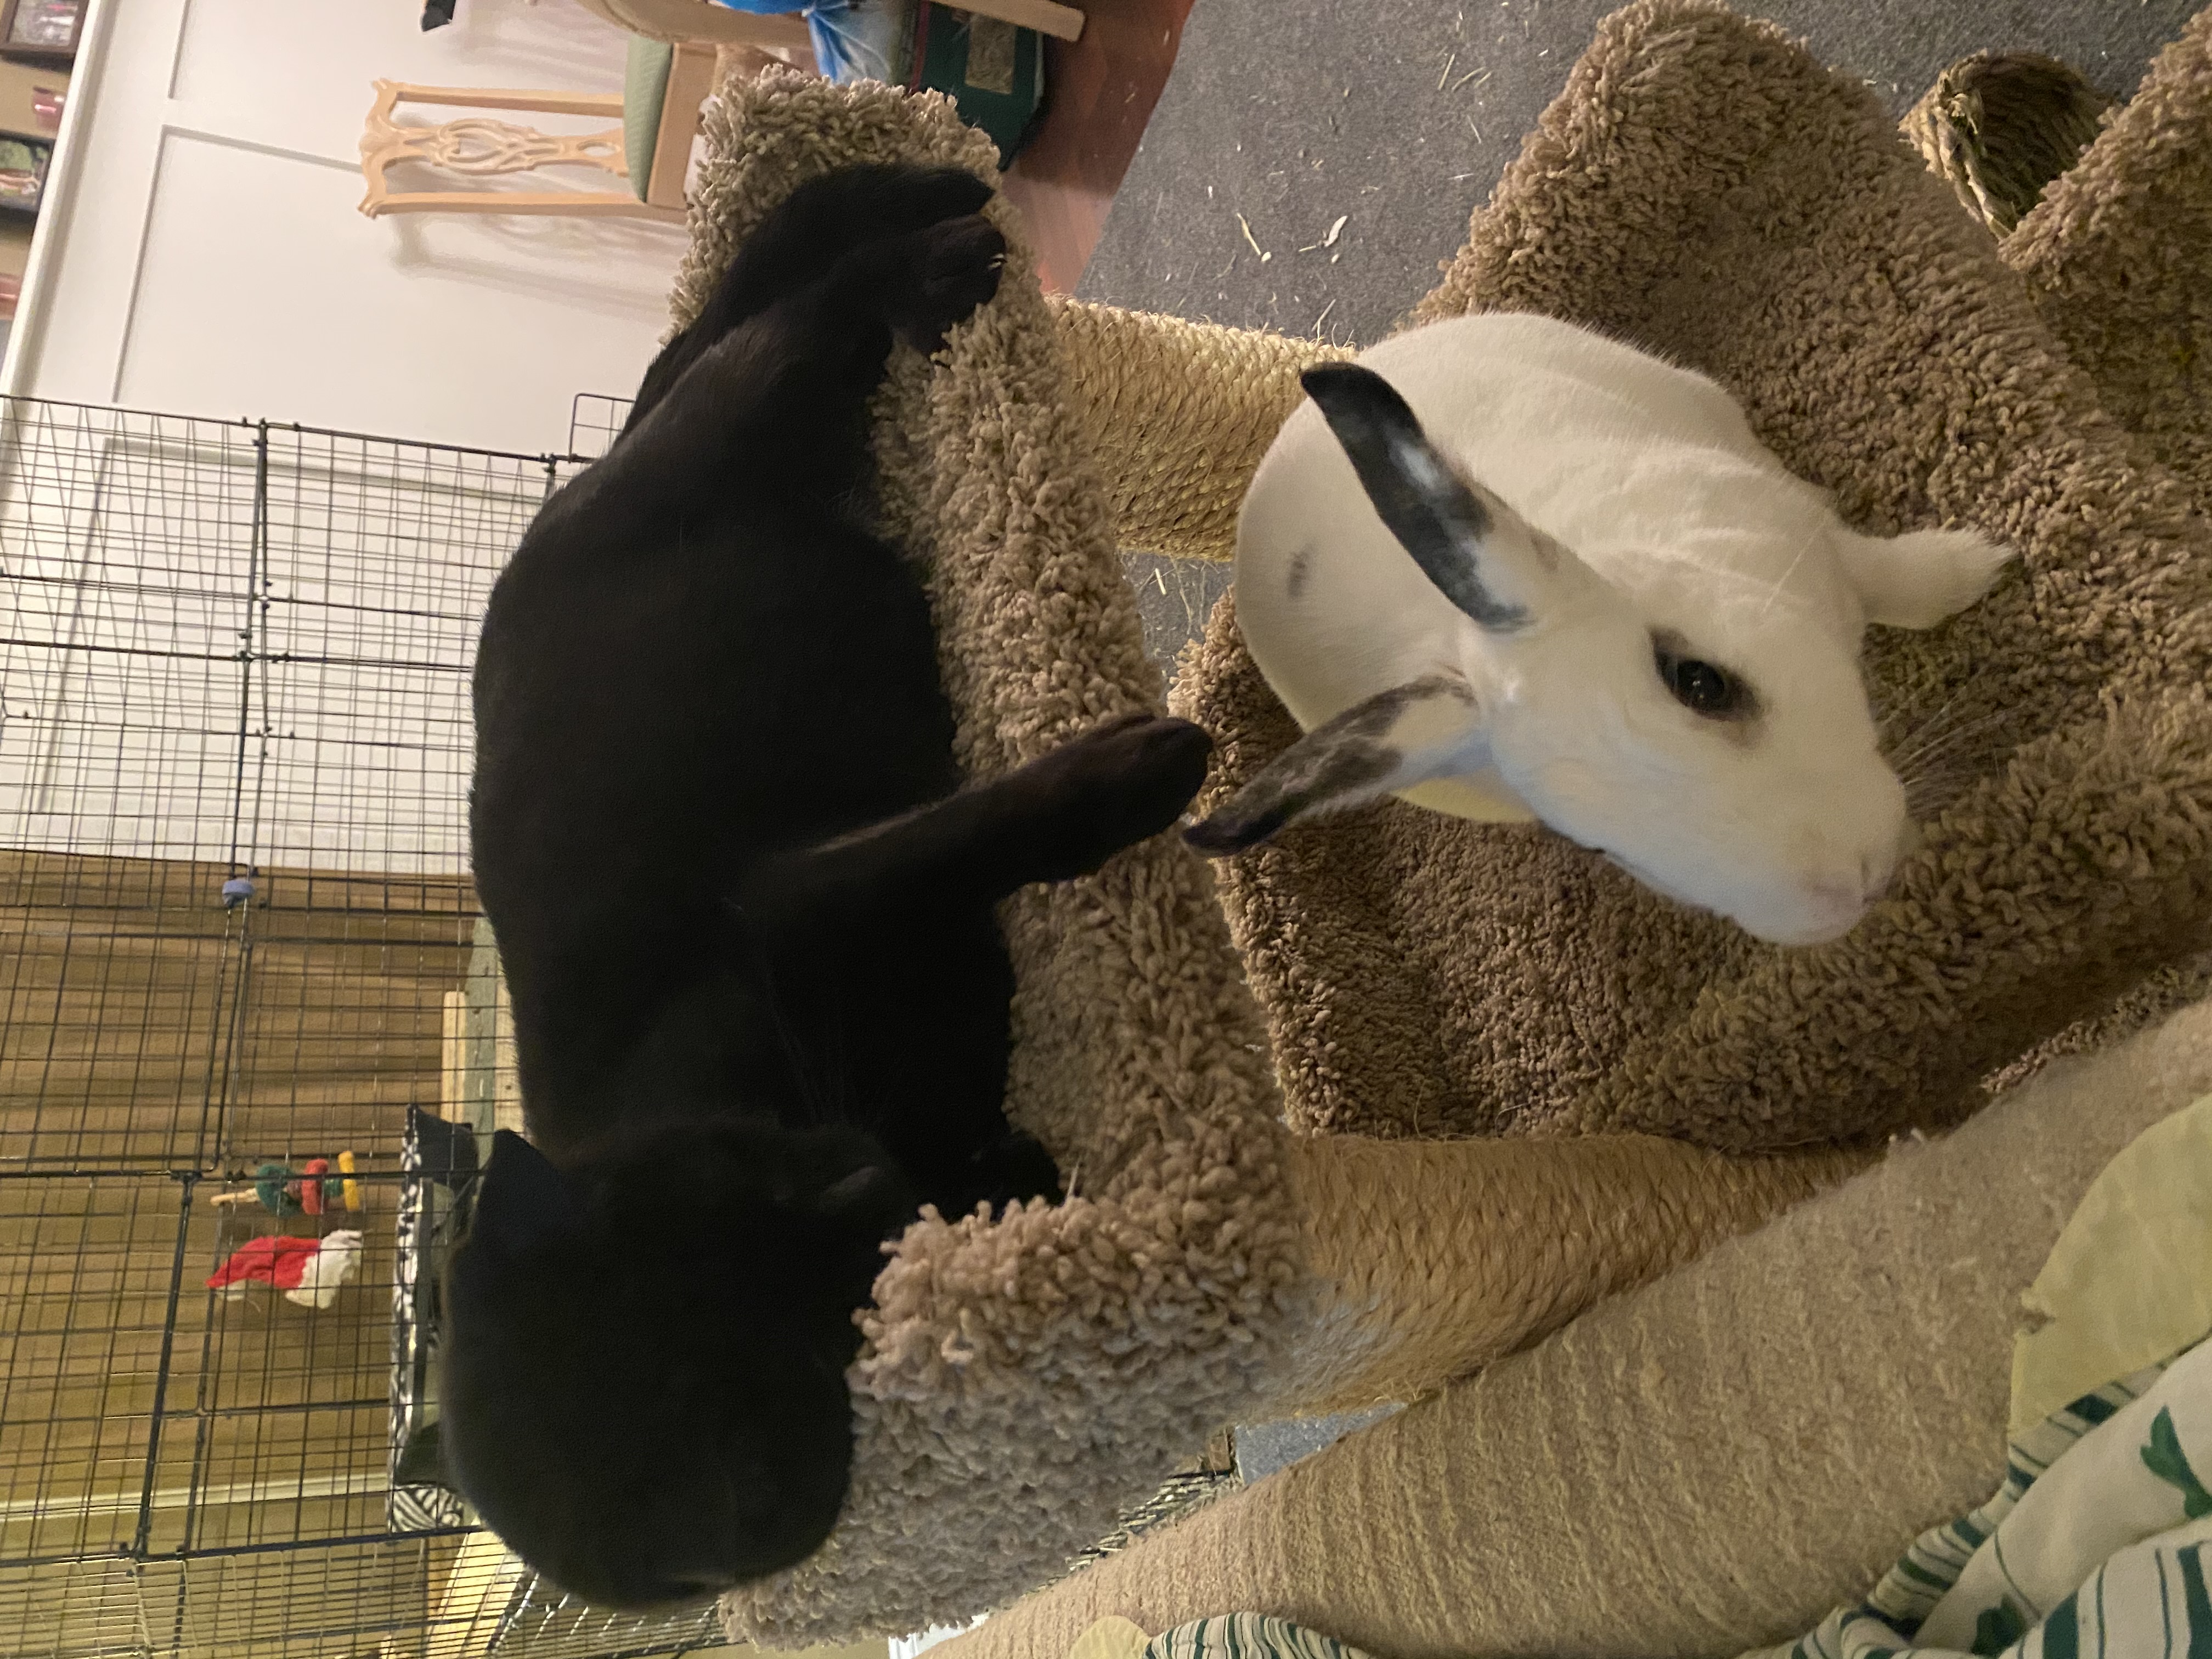 Both our black cat Zippy and white rabbit Clover, sitting on different levels of a pet tree.